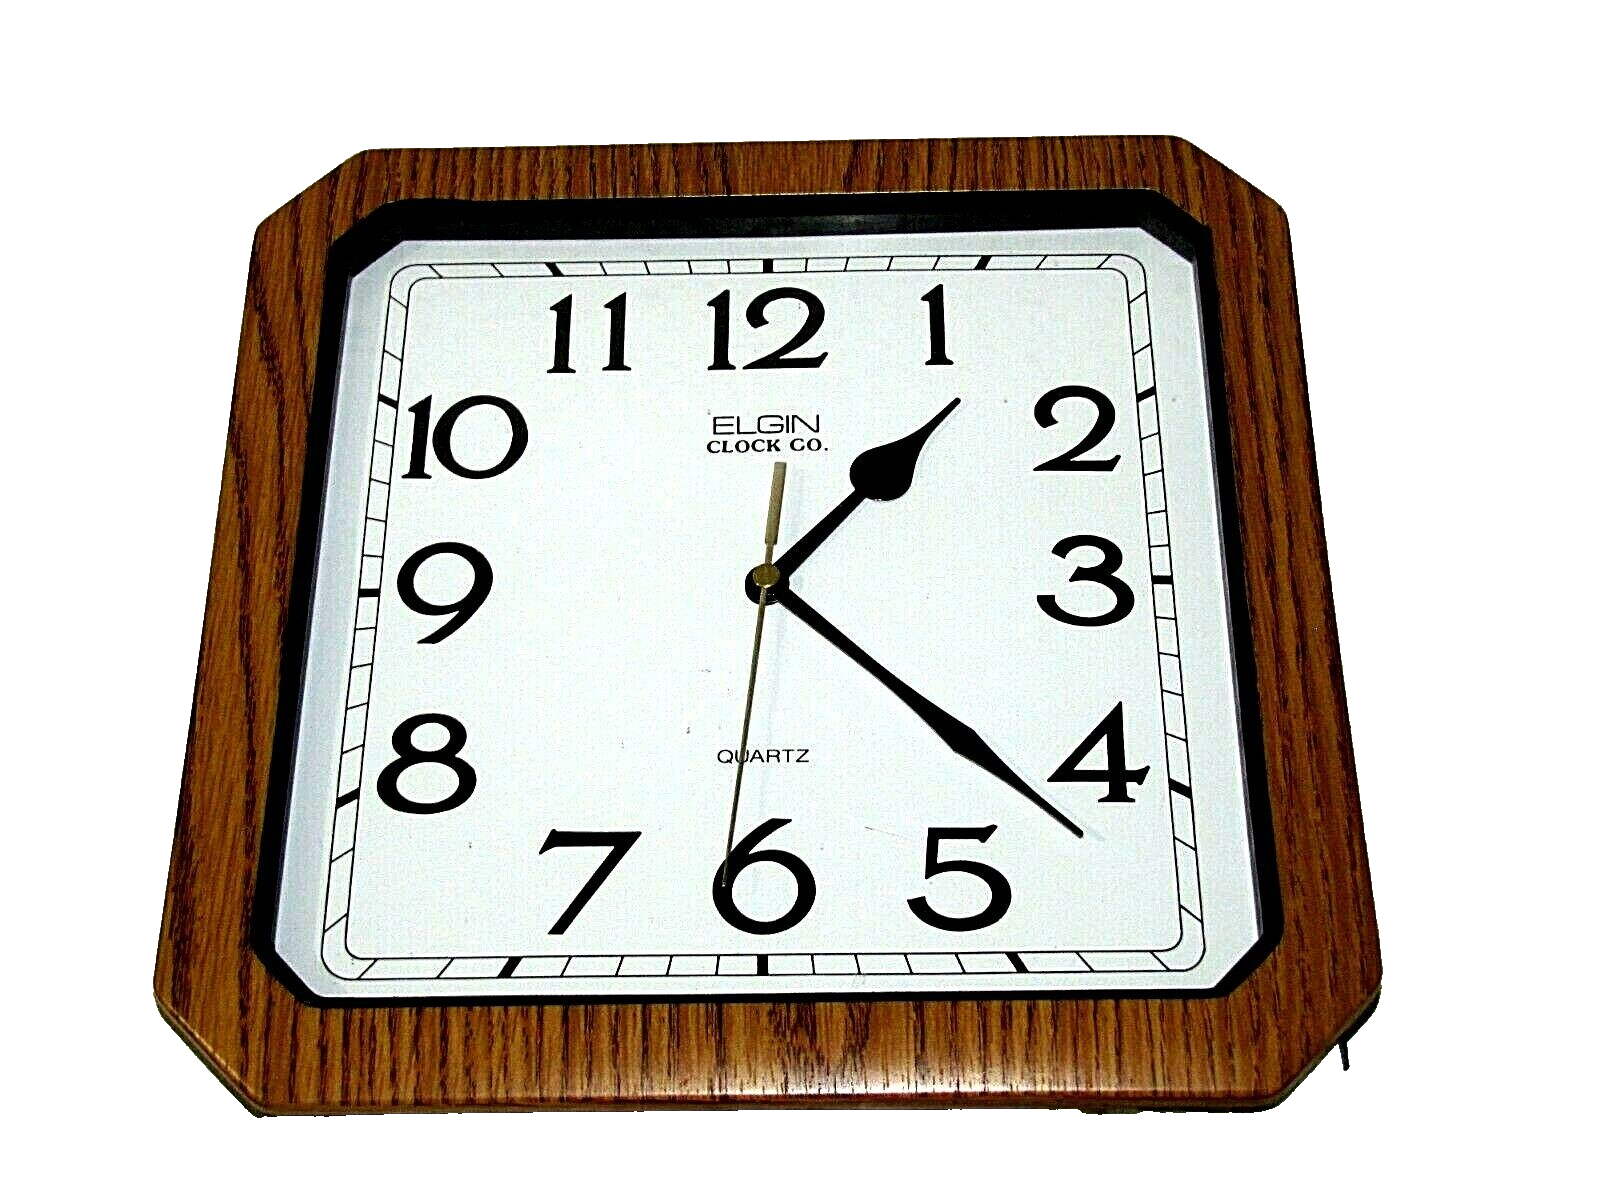 ELGIN CLOCK CO. SIMULATED WOOD QUARTZ  WALL CLOCK 12" SQUARE  XLG ARIAL NUMBERS  - $30.91